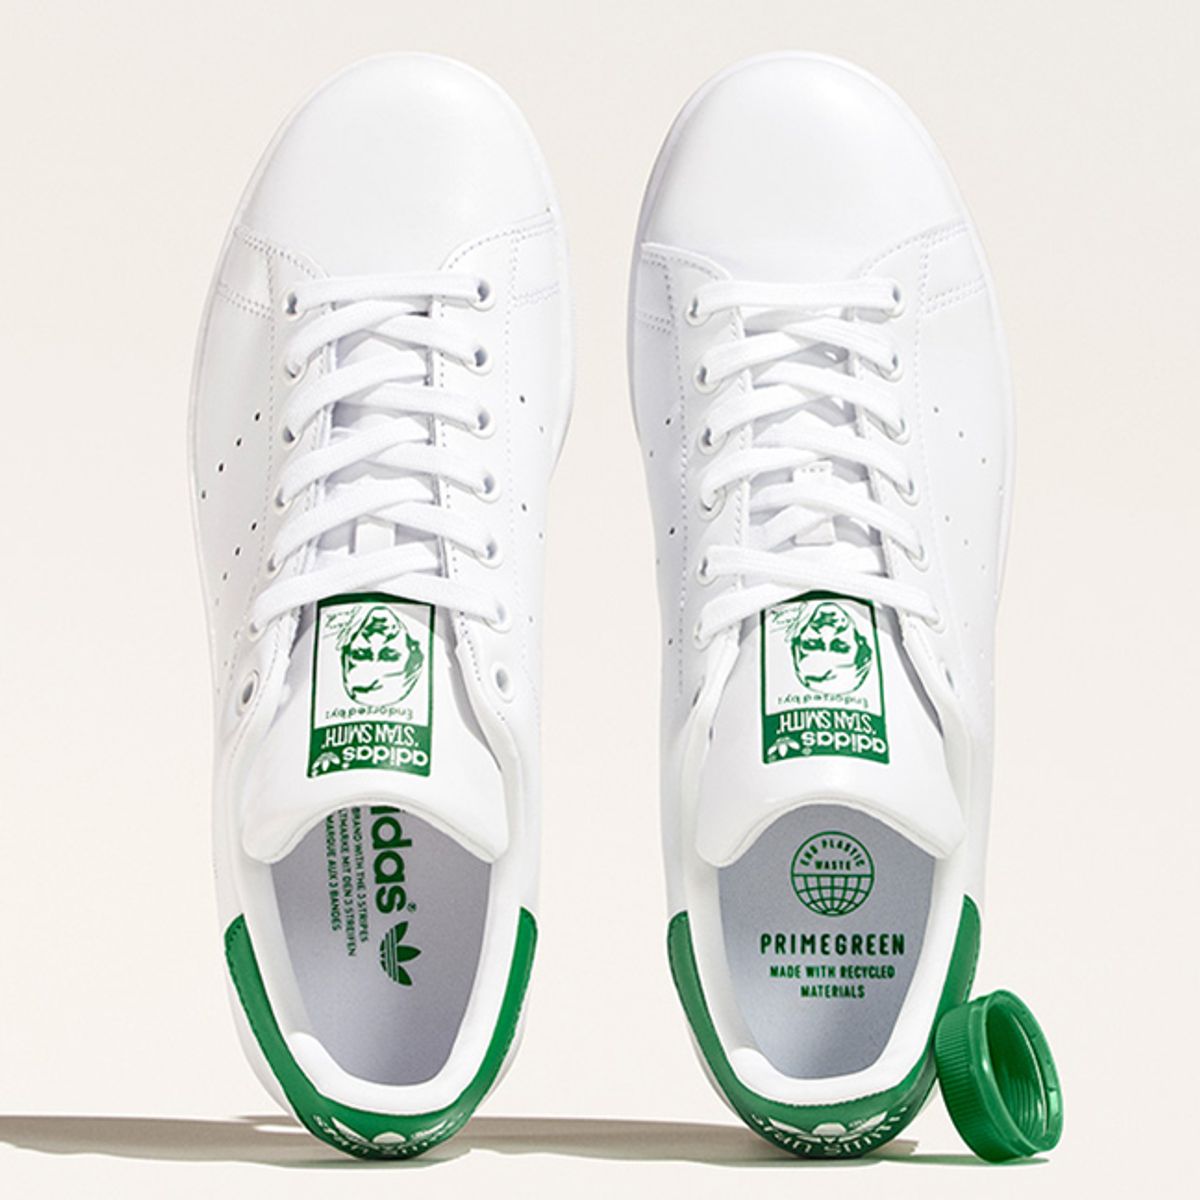 Adidas Stan Smith review: Are they worth it? - Reviewed